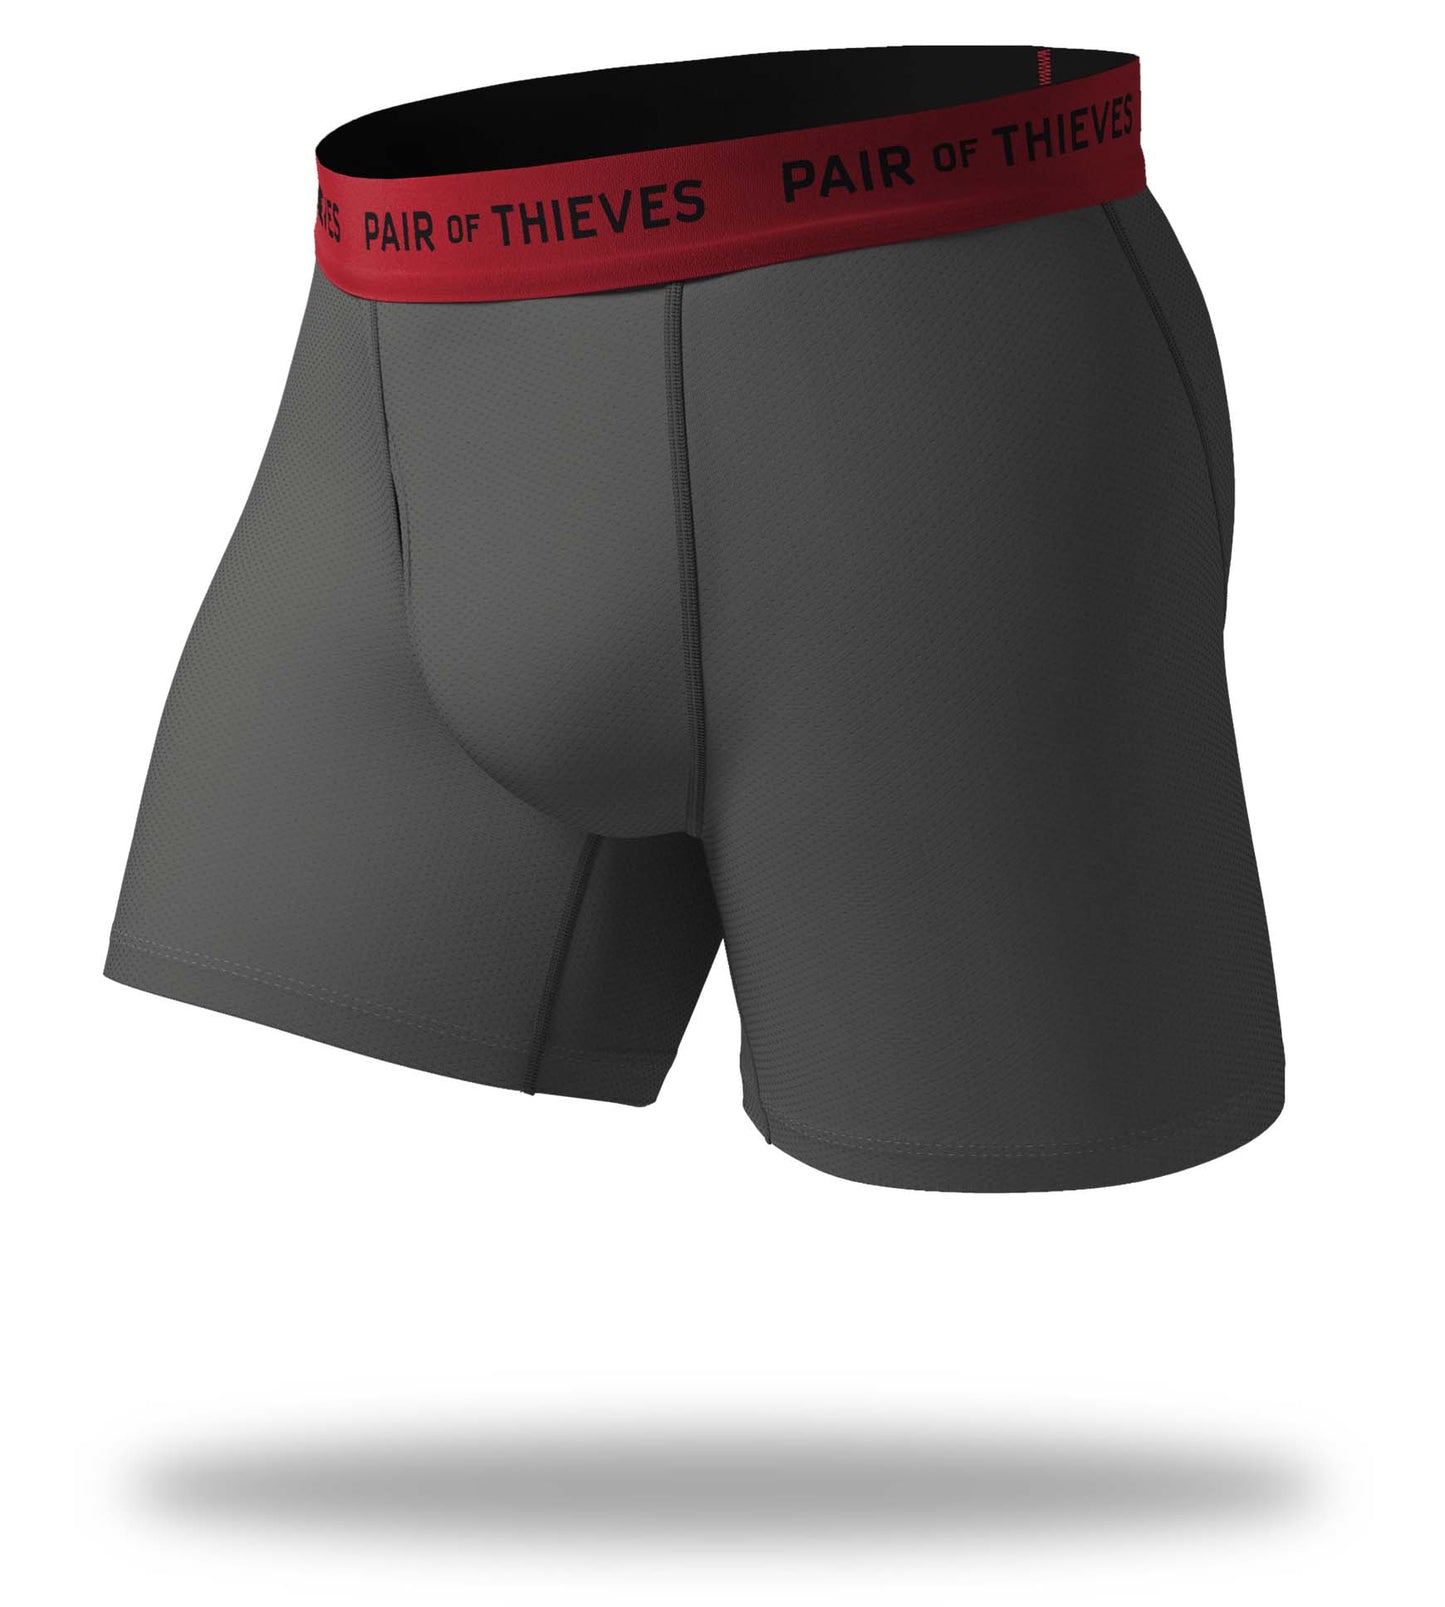 SuperFit Long Boxer Briefs 2 Pack, grey with black logo on red waistband